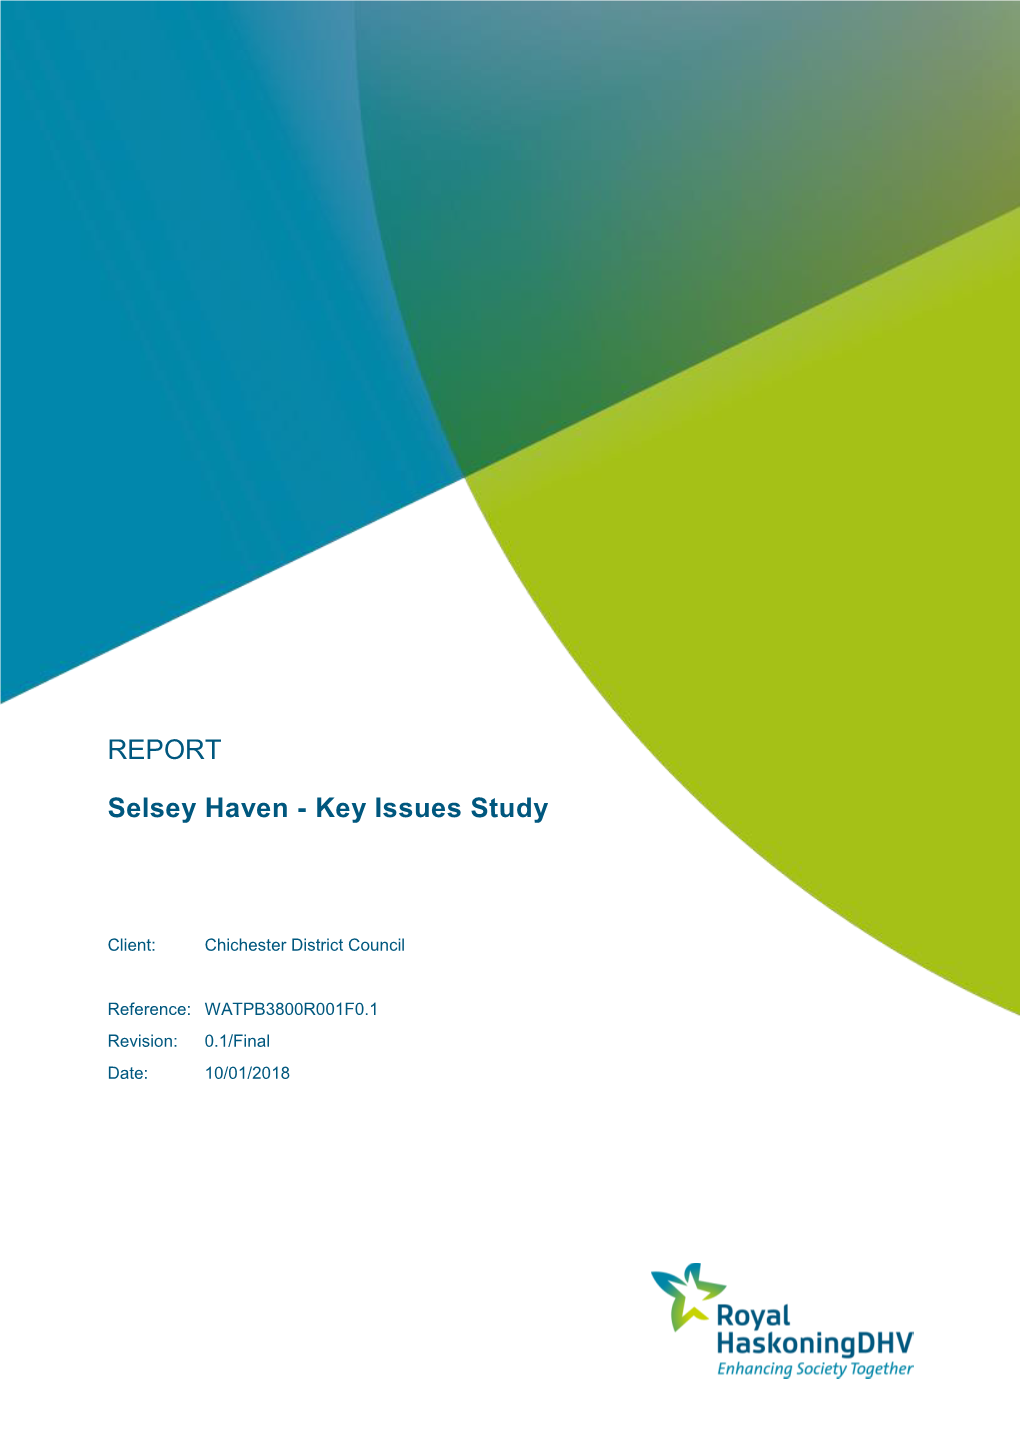 Selsey Haven - Key Issues Study